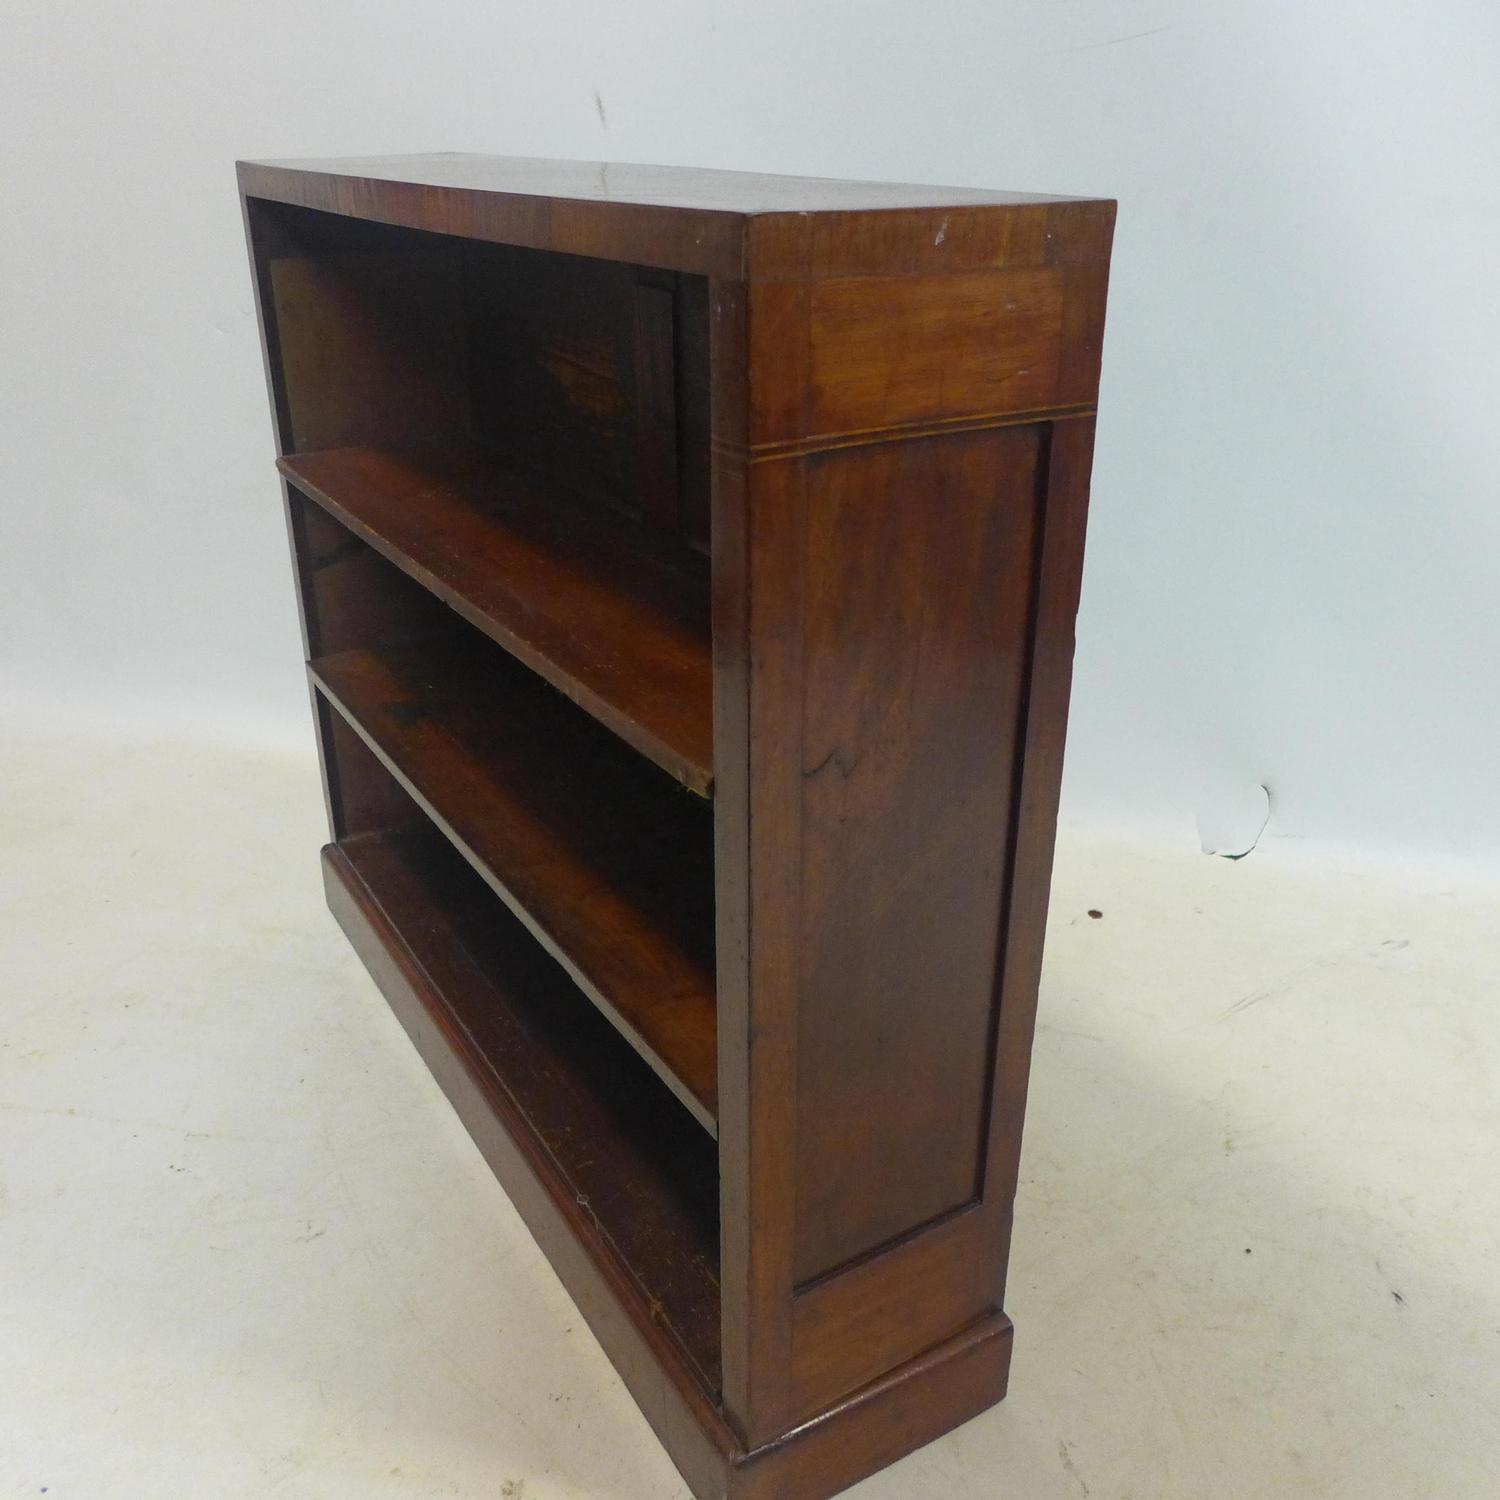 An early 20th century inlaid mahogany open bookcase, raised on plinth base, H.73 W.86 D.21cm - Image 2 of 2